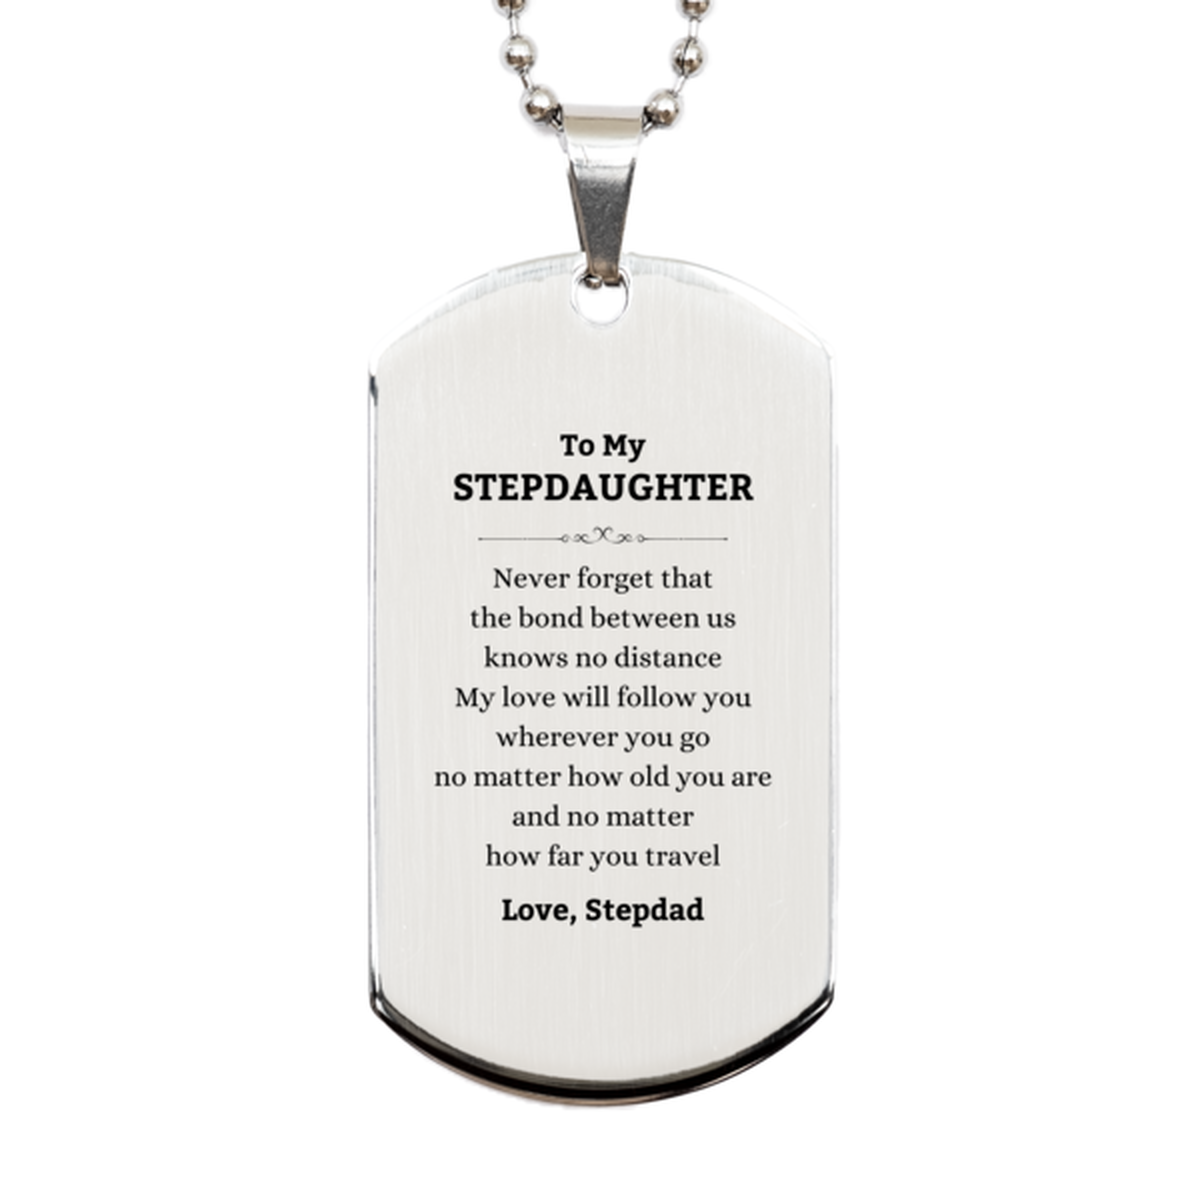 Stepdaughter Birthday Gifts from Stepdad, Adjustable Silver Dog Tag for Stepdaughter Christmas Graduation Unique Gifts Stepdaughter Never forget that the bond between us knows no distance. Love, Stepdad